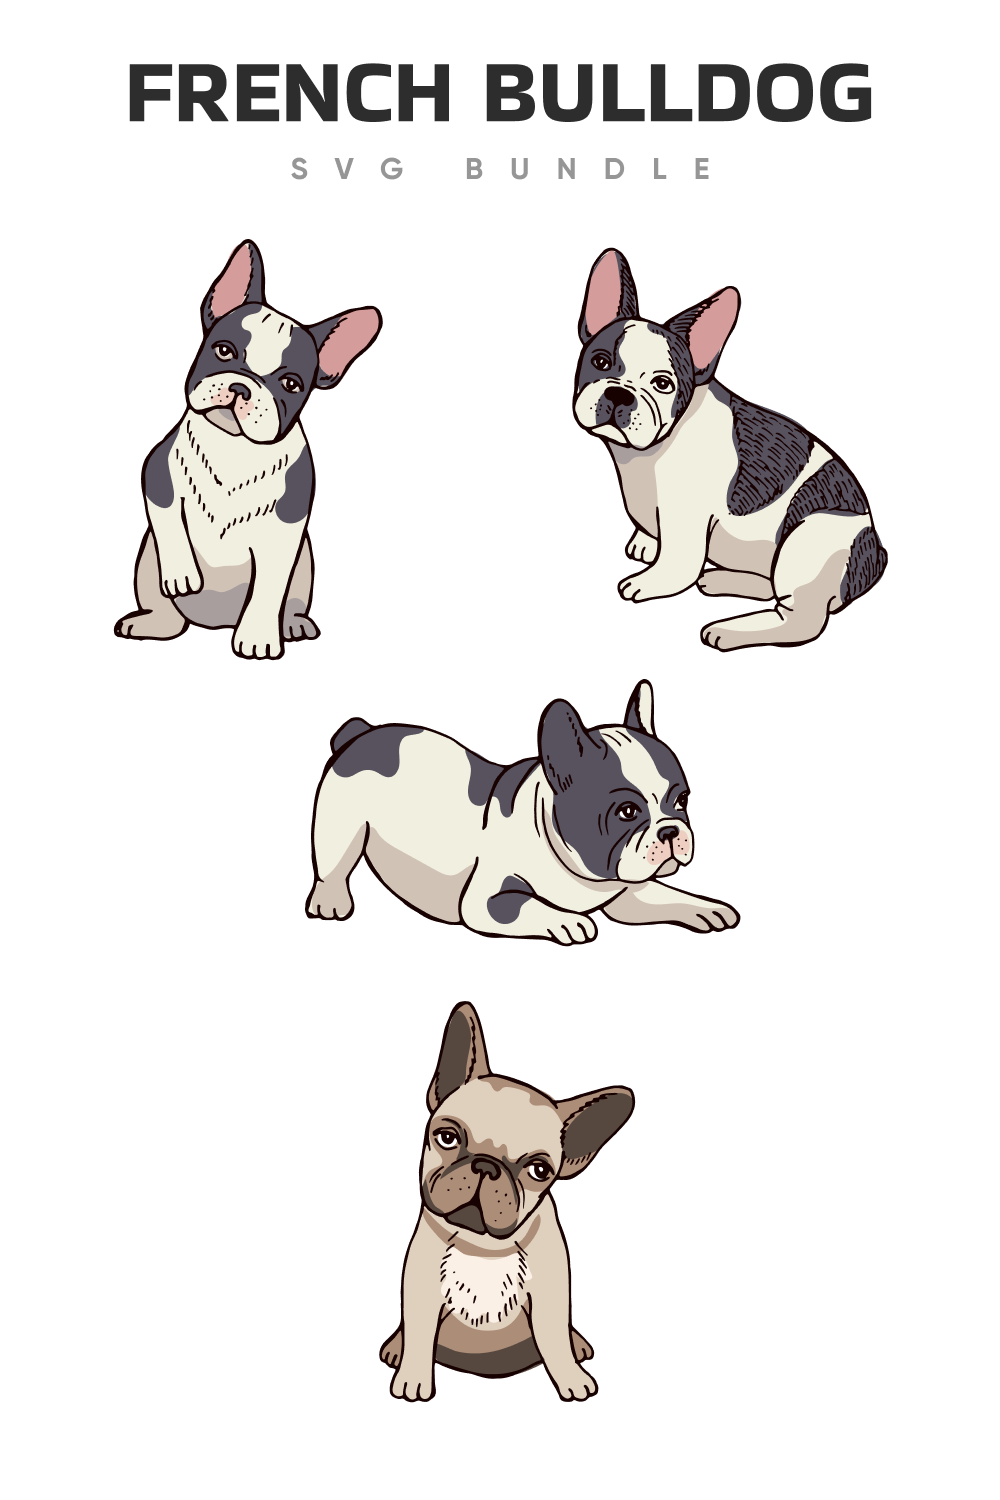 Cute french bulldog in the different poses.